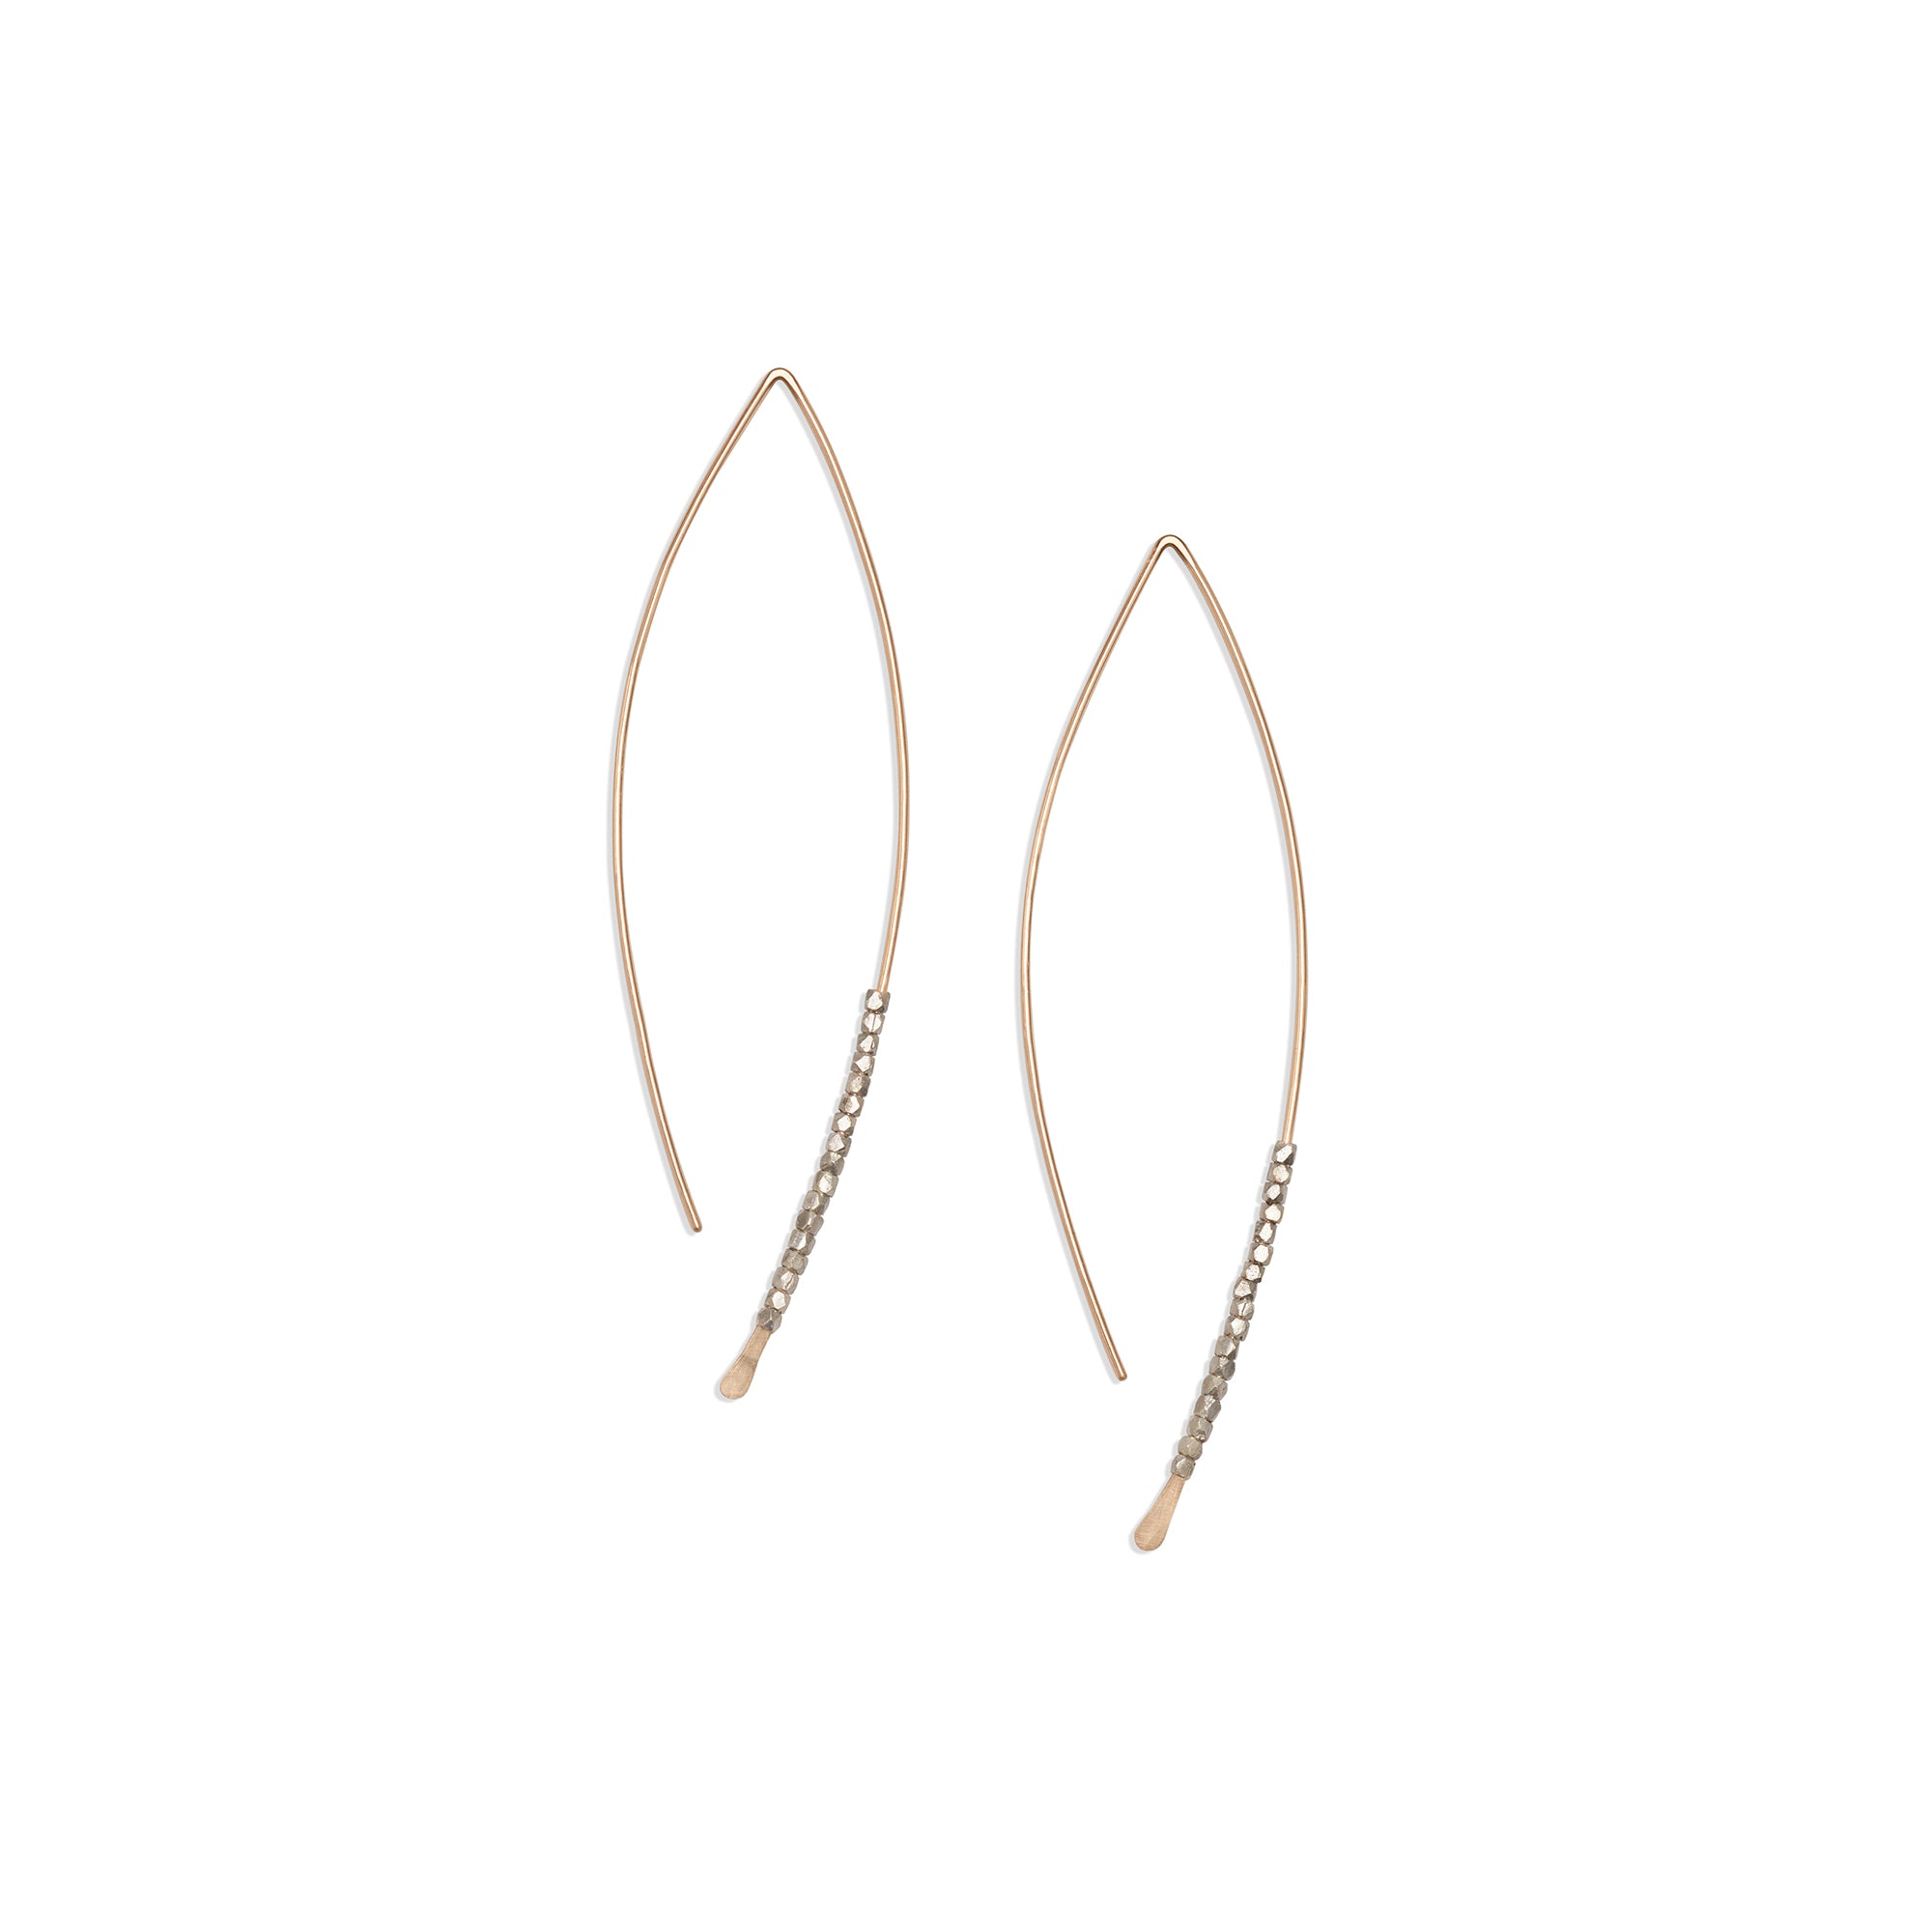 Wedding Party Set: the thin, hammered wire of the Bead Crescent Earrings is adorned with sterling silver beads 